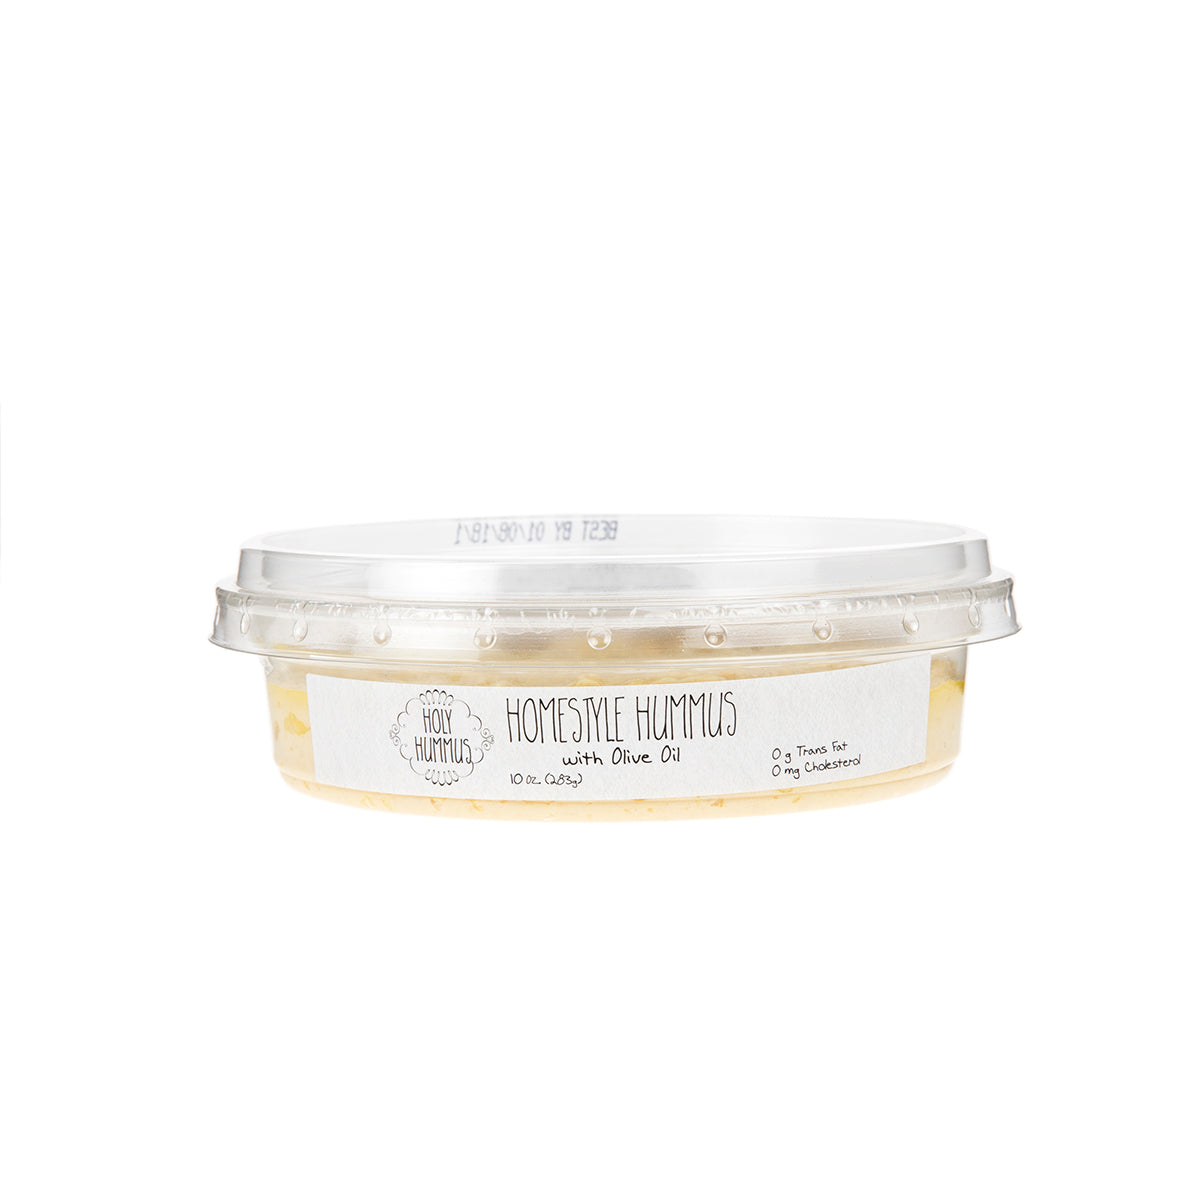 Holy Hummus Homestyle Hummus  with Olive Oil 10 OZ